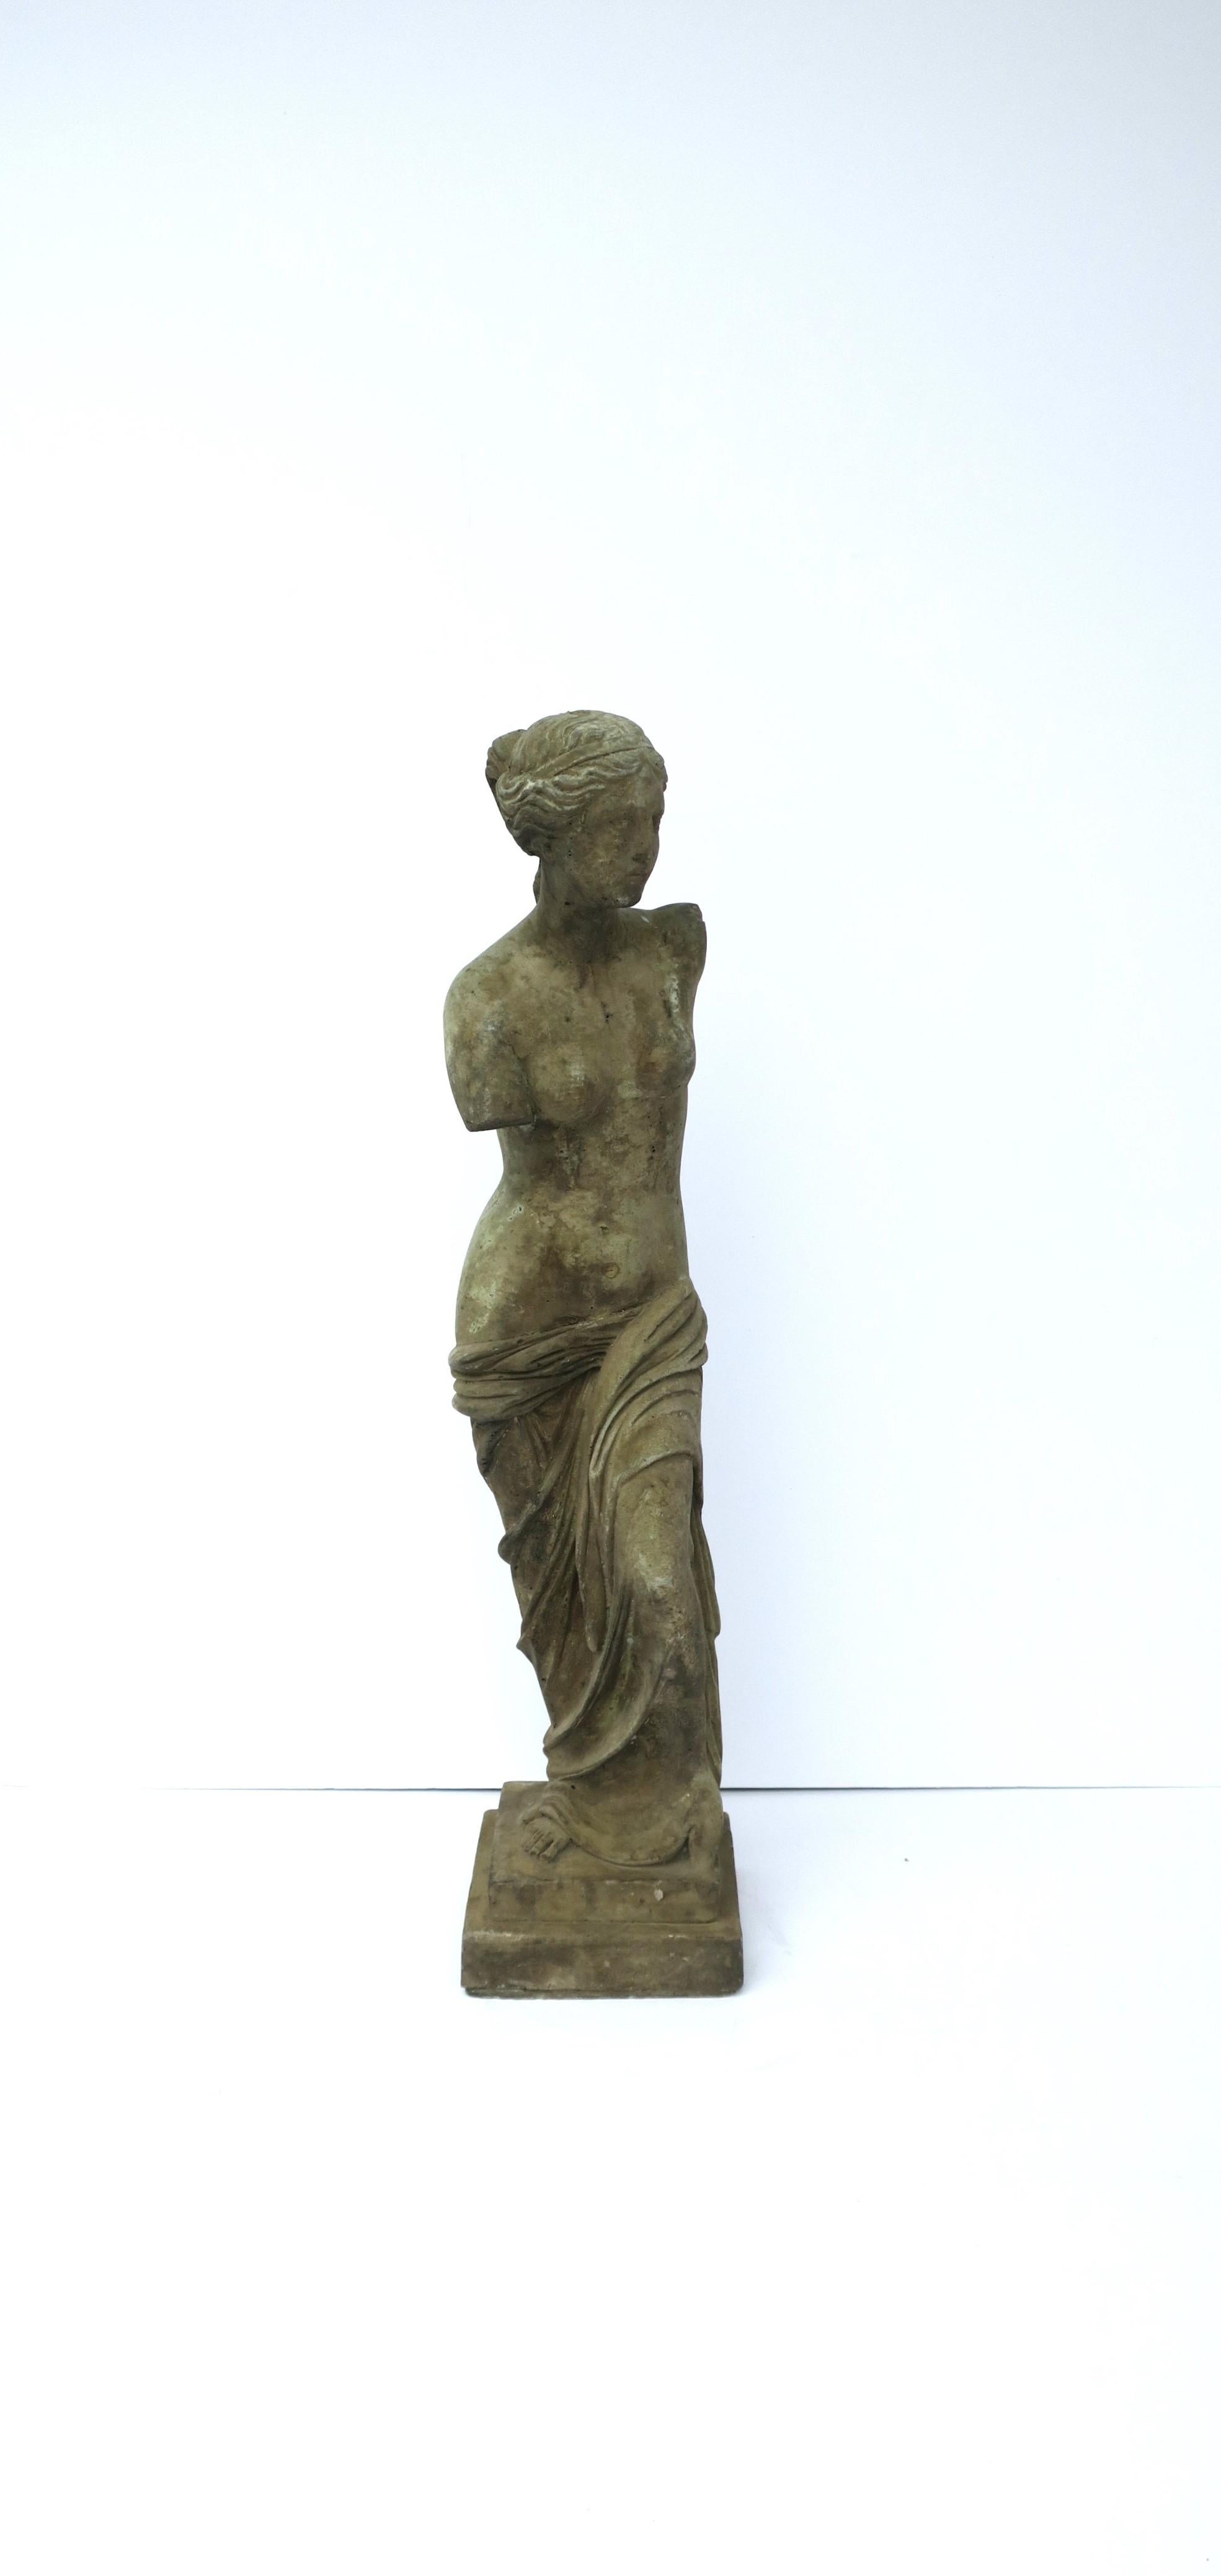 A beautiful Venus de Milo female figurative cast stone statue sculpture piece, in the Neoclassical style, circa 20th century. A great statement piece indoors on a column pedestal, cocktail table, etc., or outdoors, a garden or patio area, pool